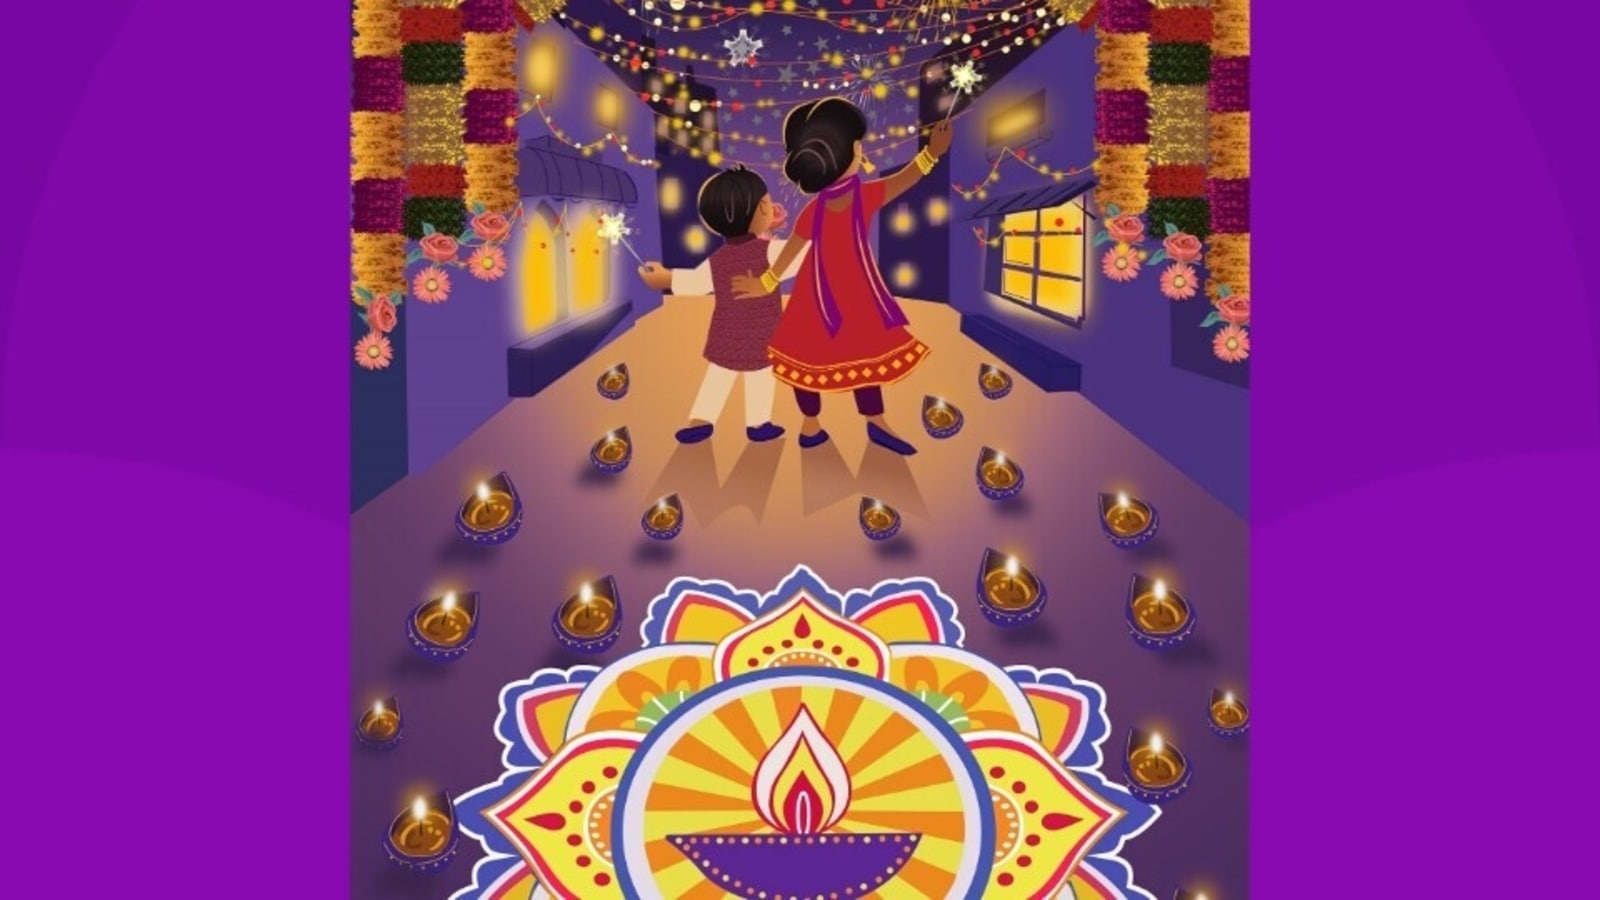 To celebrate Diwali we are giving away tickets to tonight's